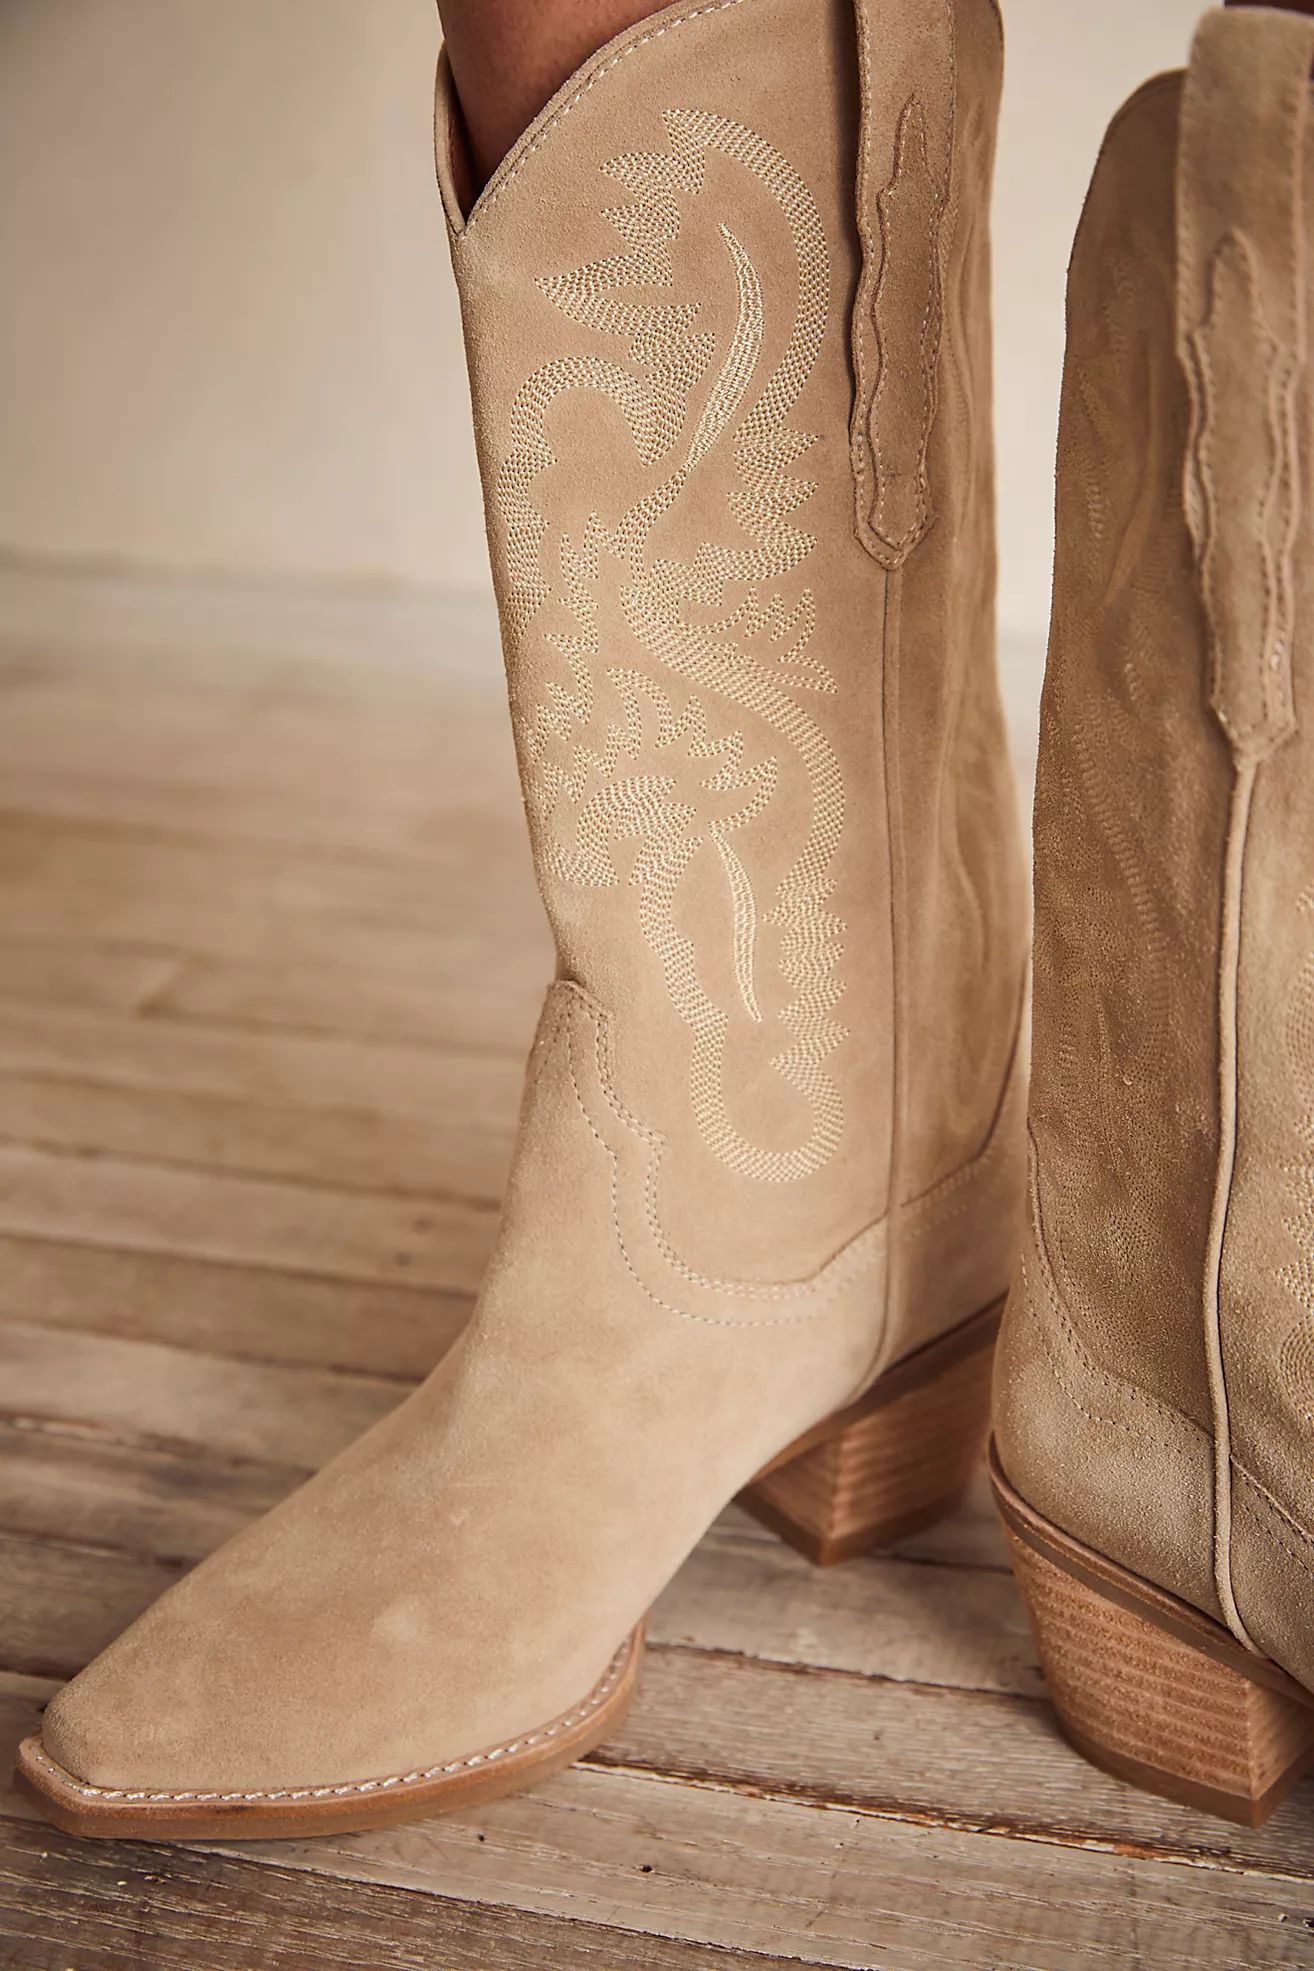 Similar Items

               
            Finn Tall Western Boots
            
                Q... | Free People (Global - UK&FR Excluded)